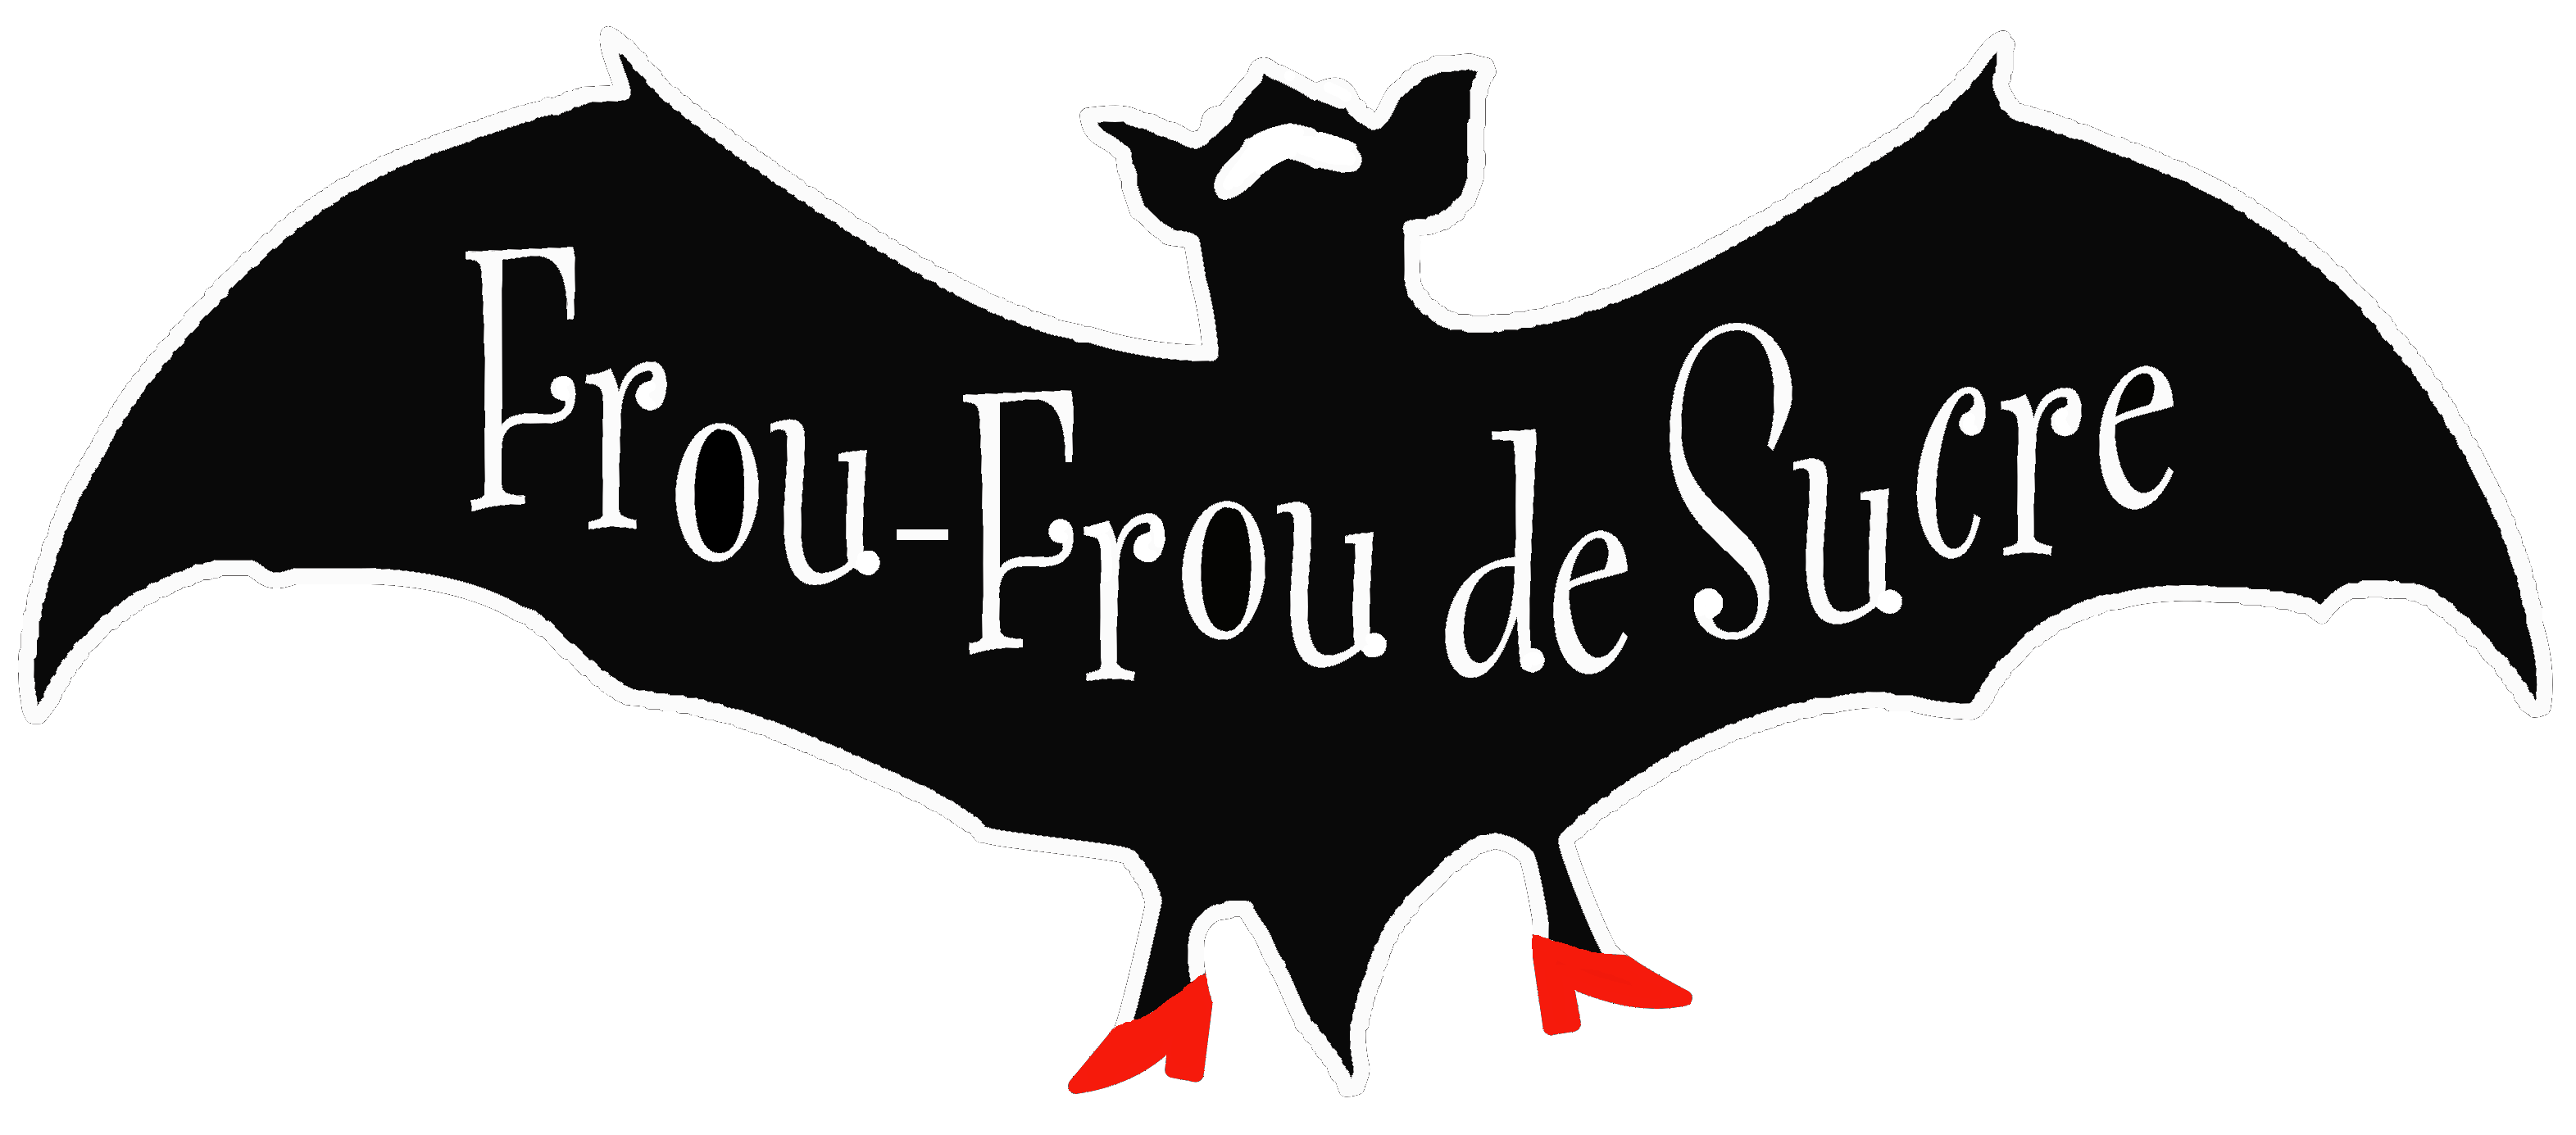 froufroudesucre